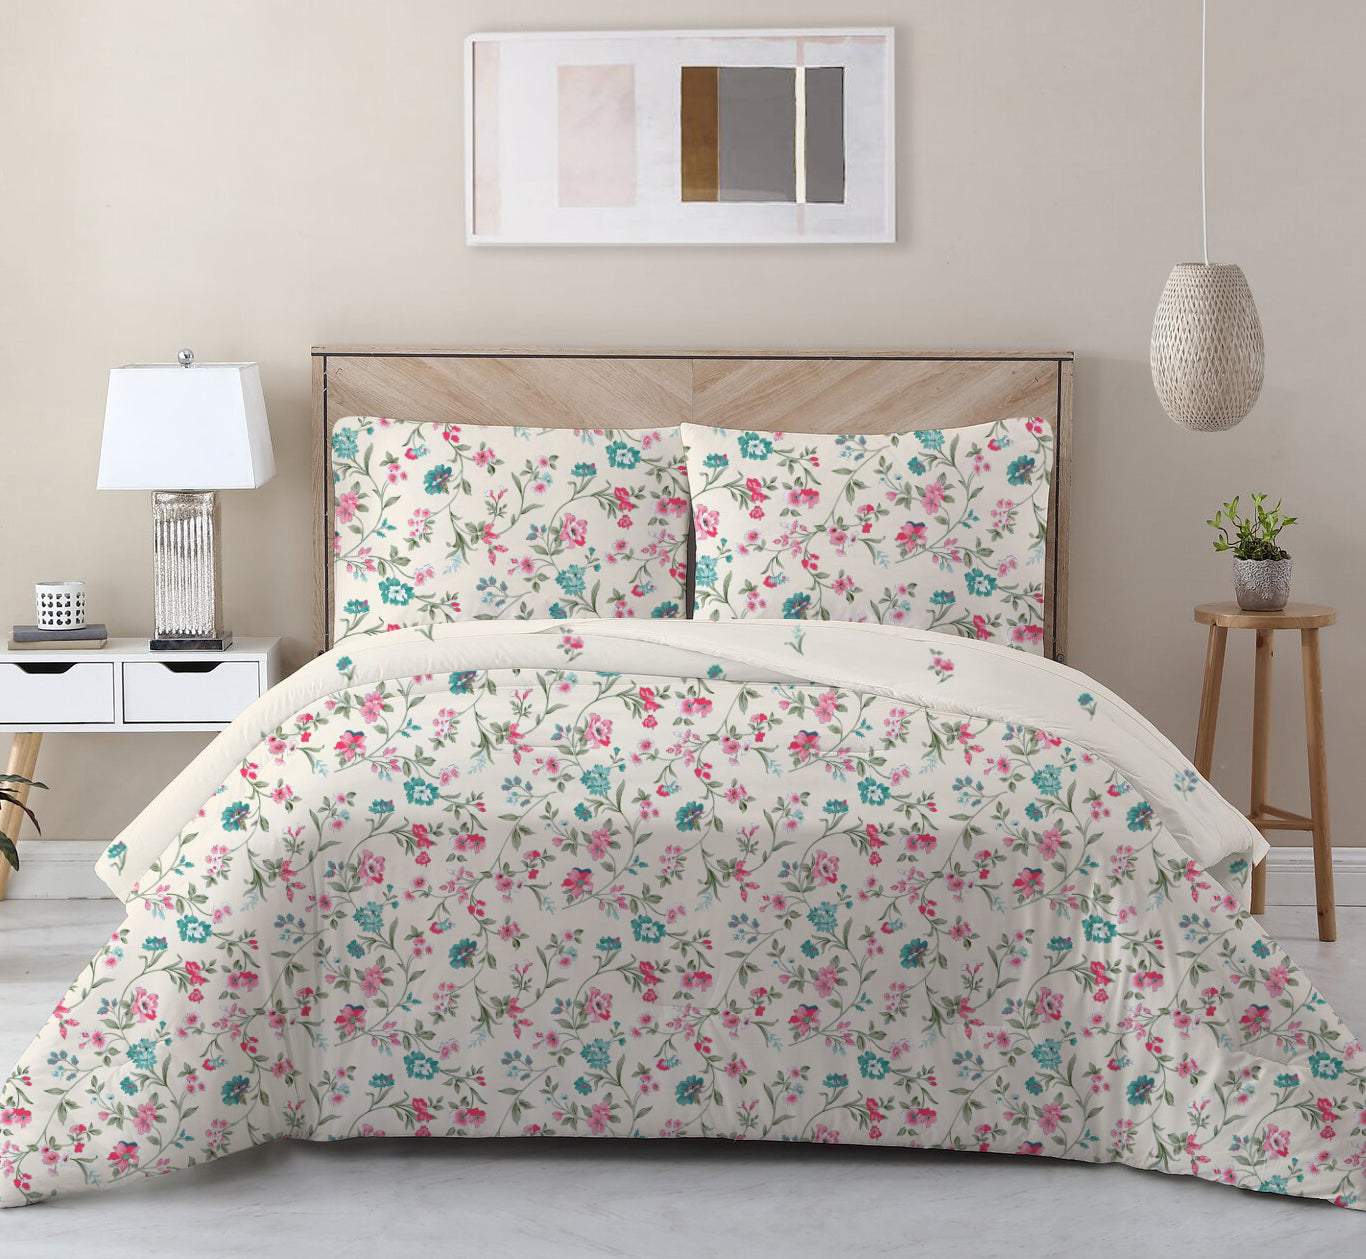 Buy 100% Cotton 3-Piece Printed Floral Scroll Comforter Set Single/queen/king size